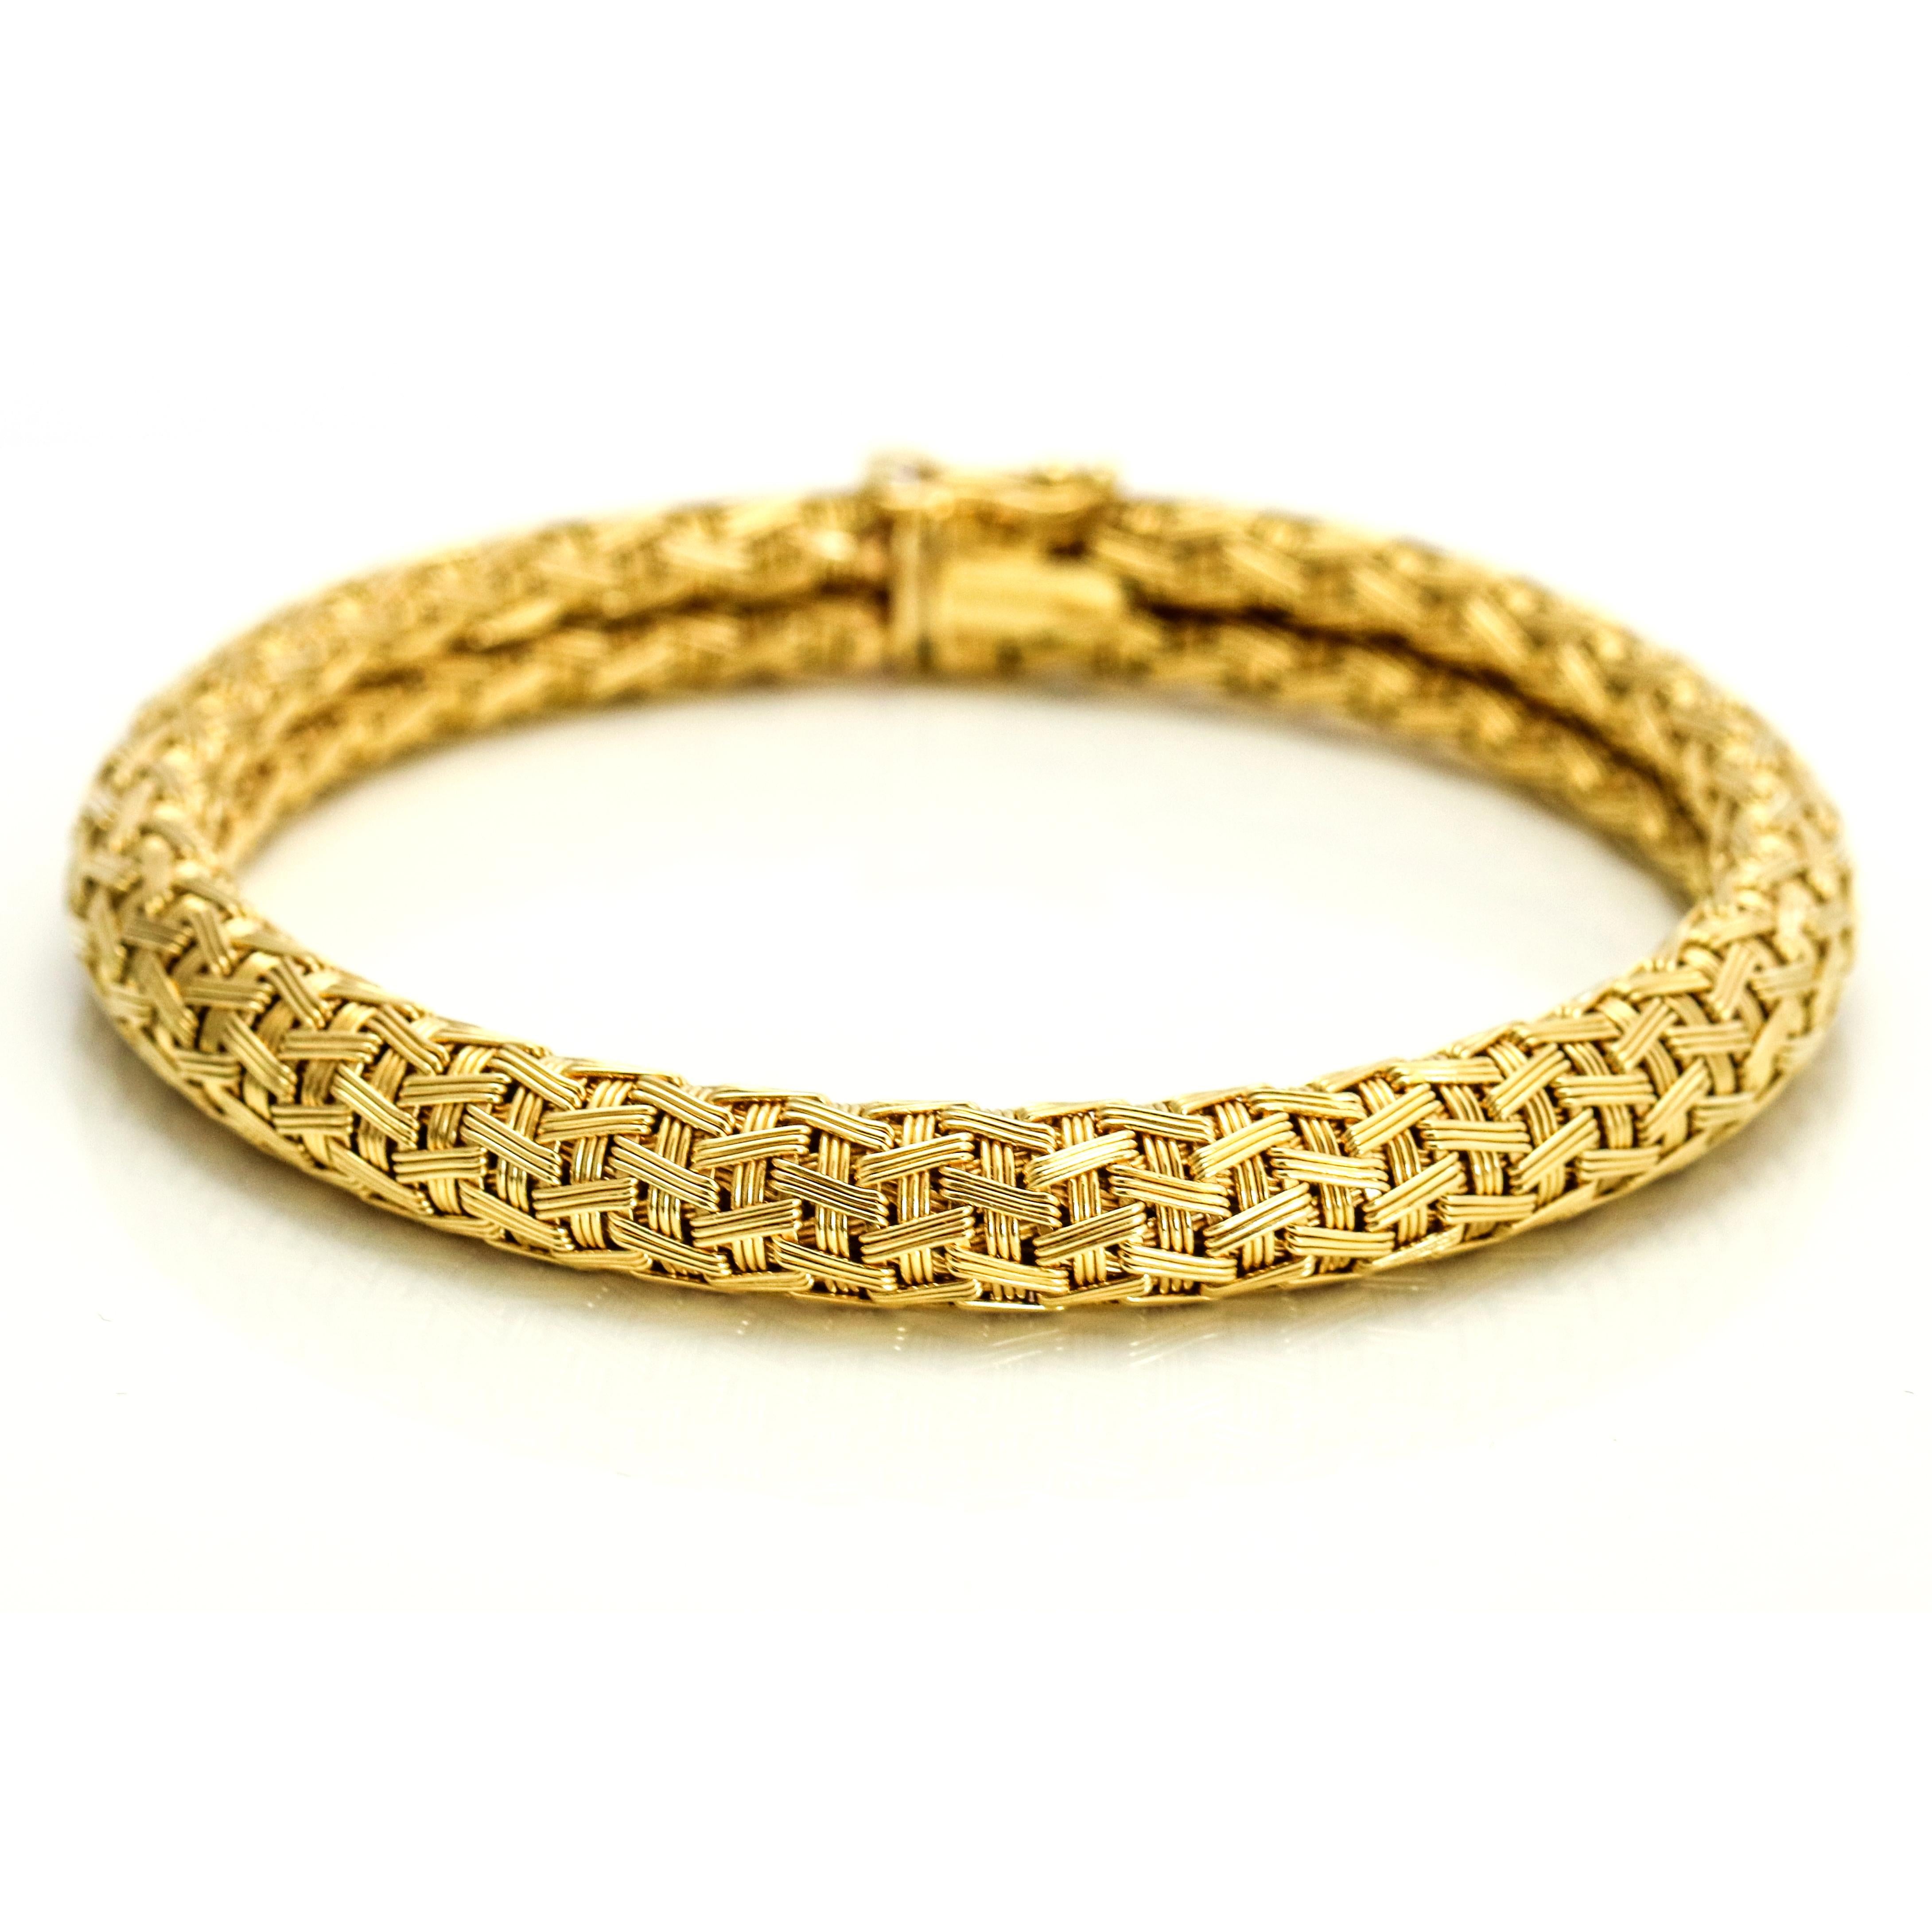 Woven chain bracelet in 18-karat yellow gold. Slide clasp with safety. Made in Italy.

Size, Medium
